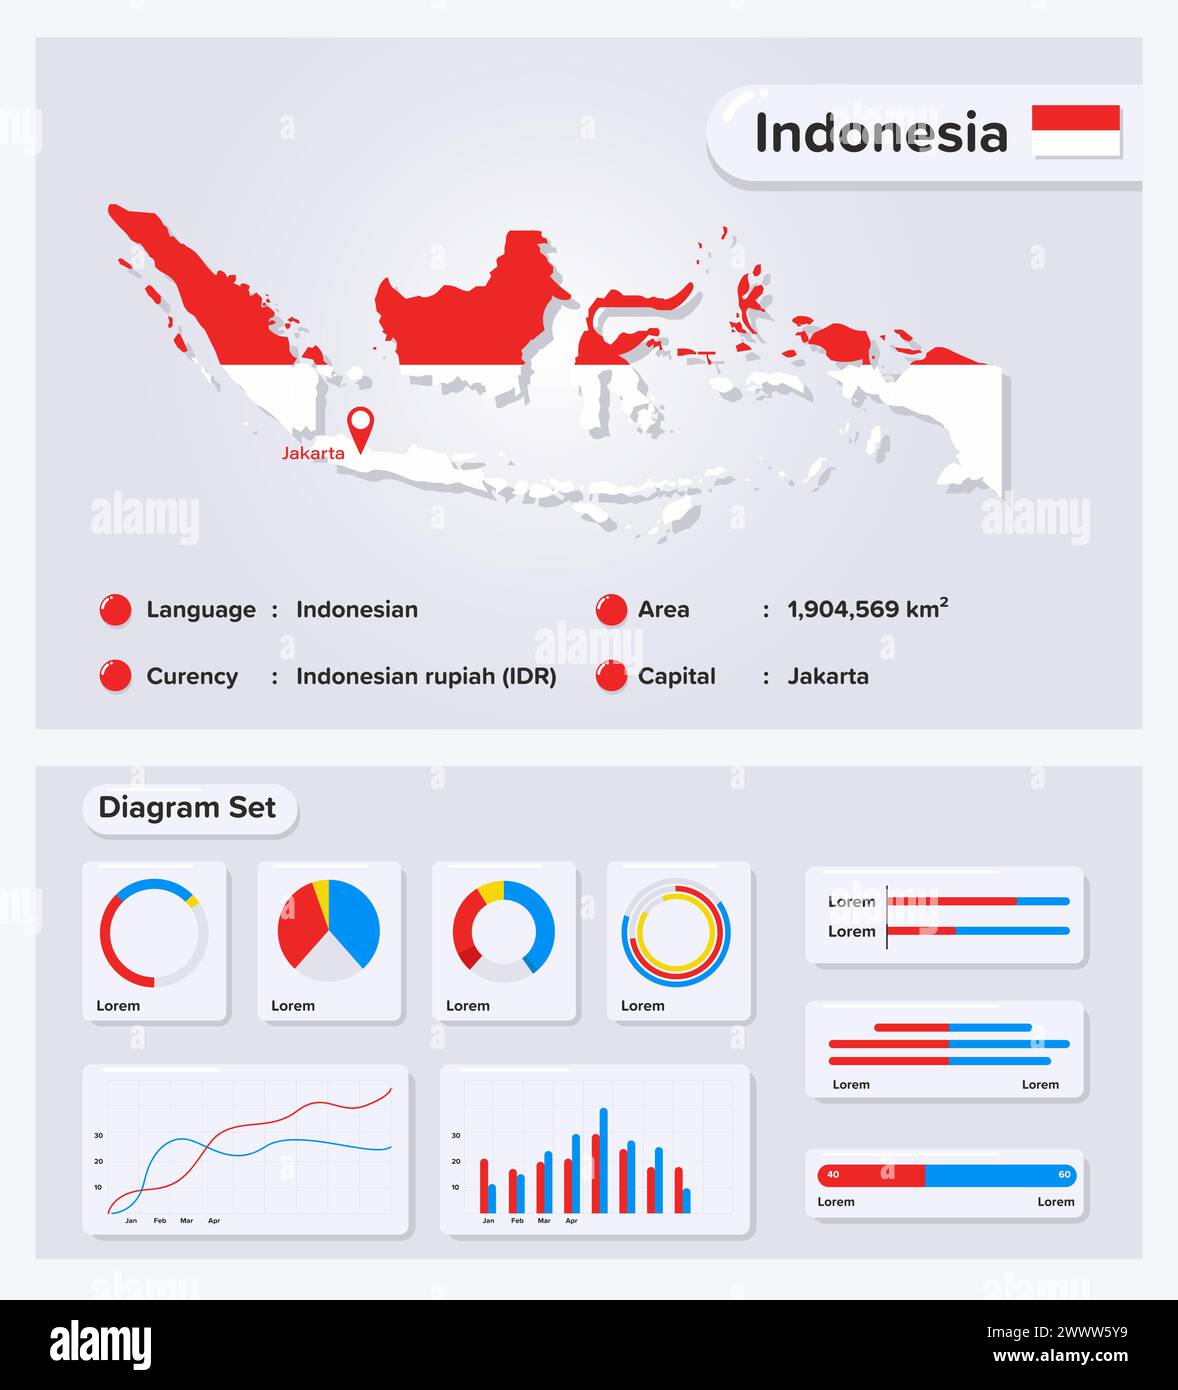 Indonesia Infographic Vector Illustration, Indonesia Statistical Data Element, Information Board With Flag Map, Indonesia Map Flag With Diagram Set Fl Stock Vector